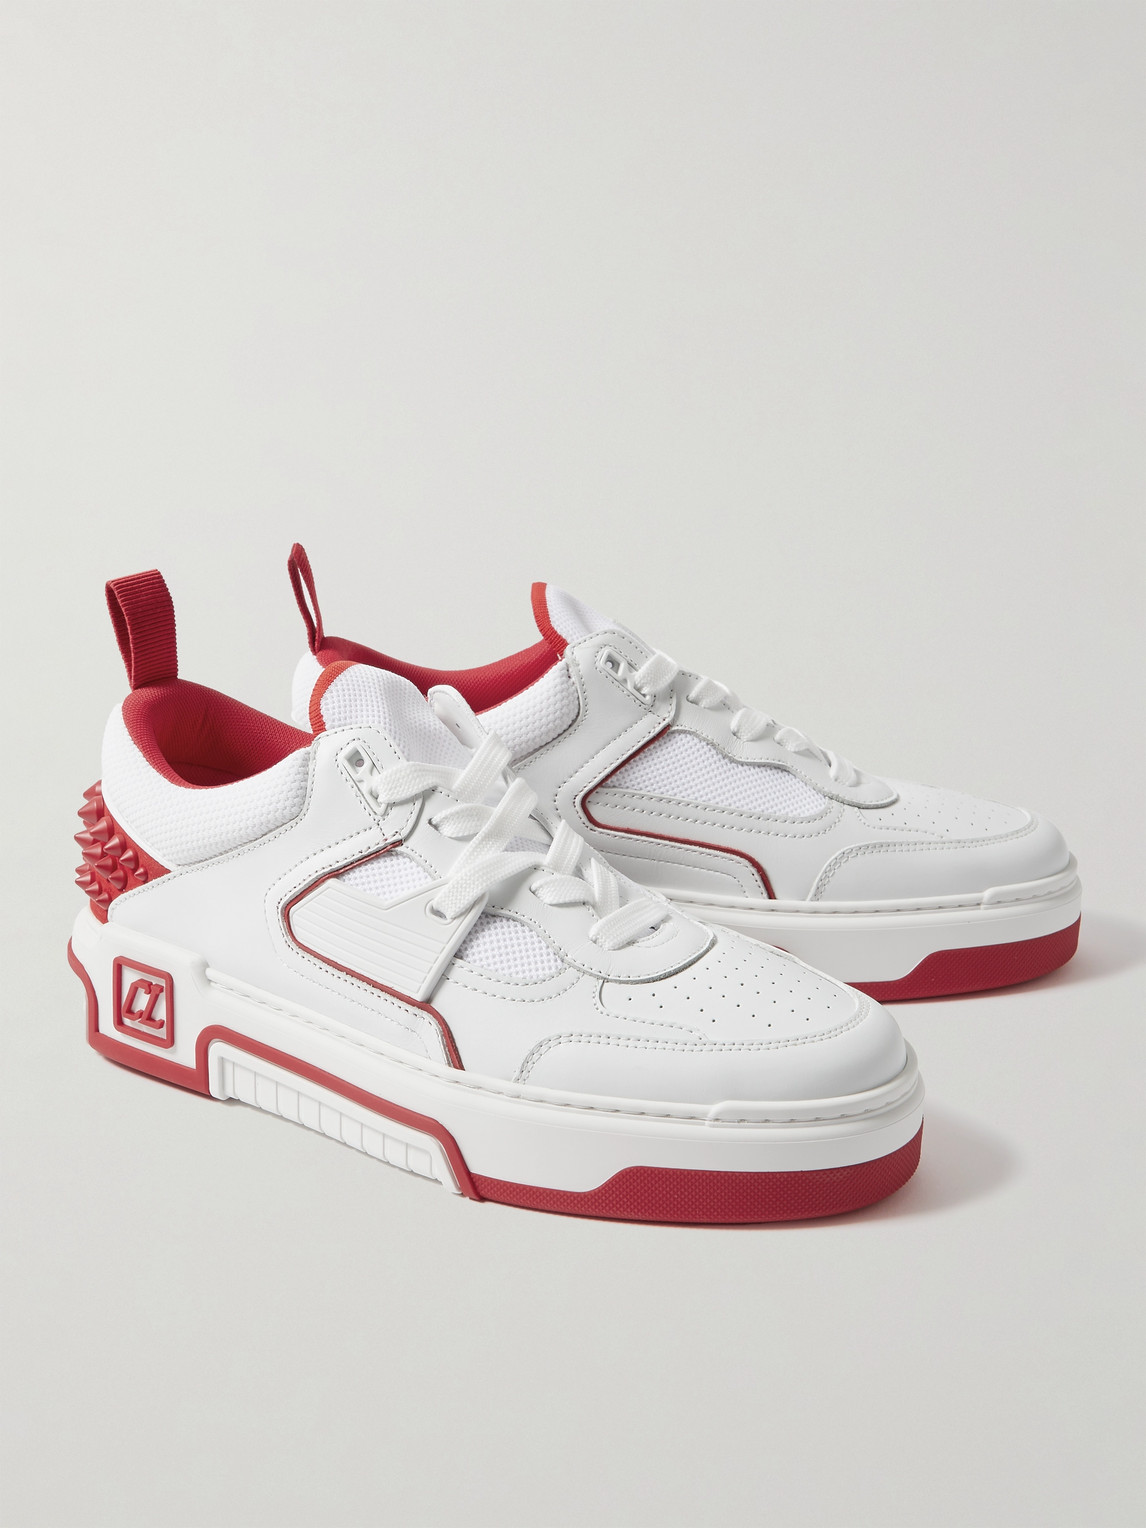 Shop Christian Louboutin Astroloubi Spiked Leather And Mesh Sneakers In White